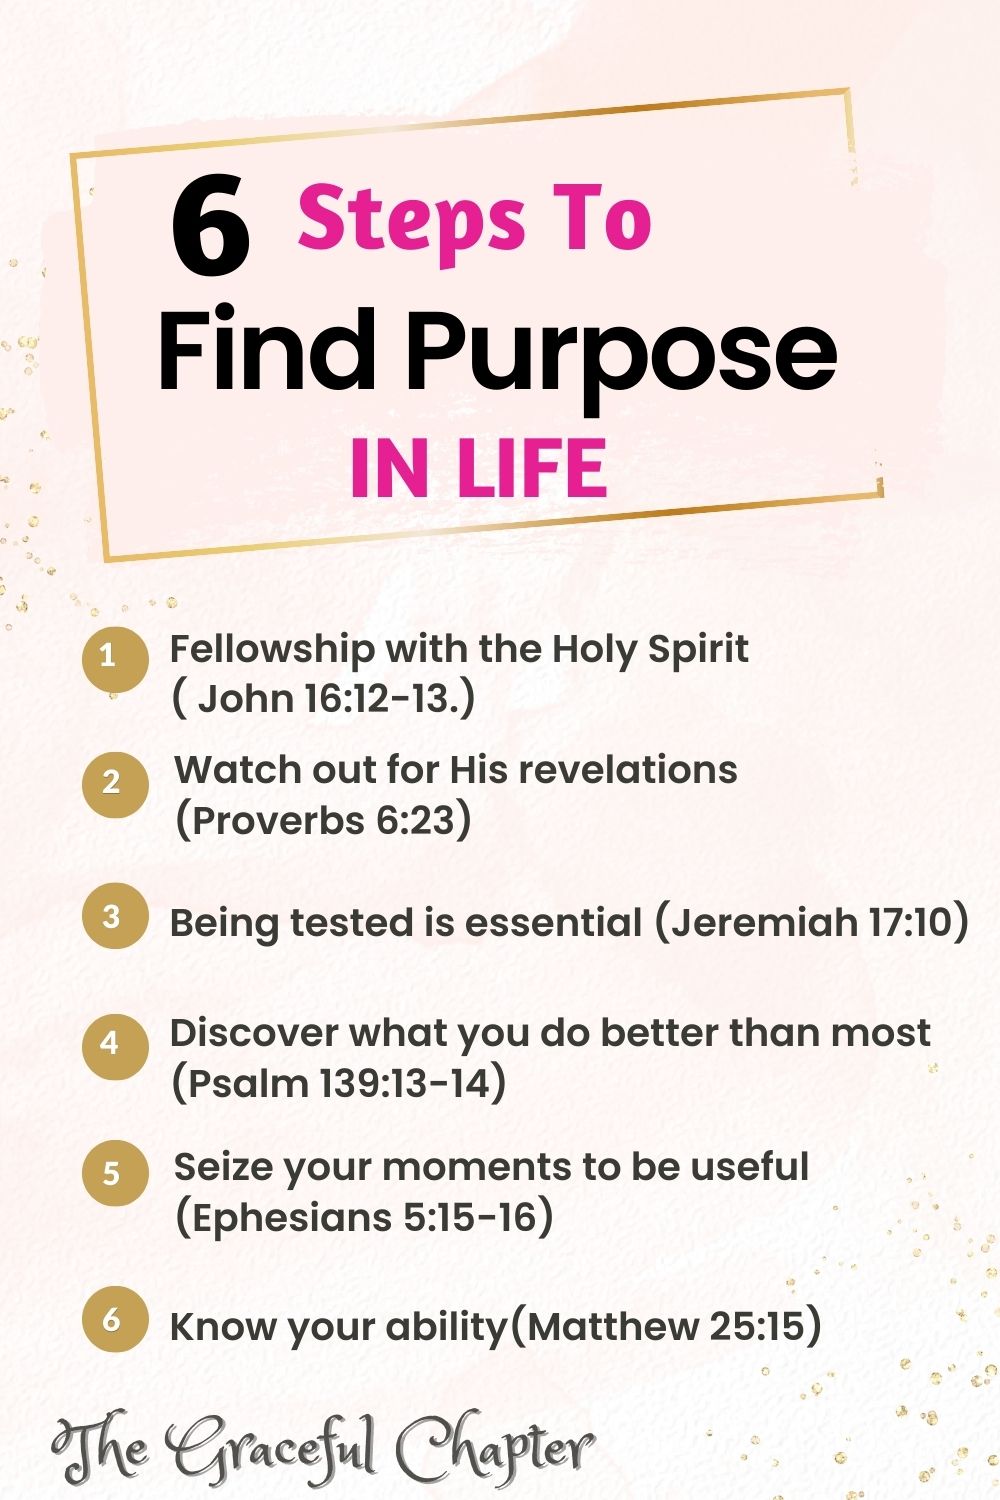 6 steps to find purpose in life